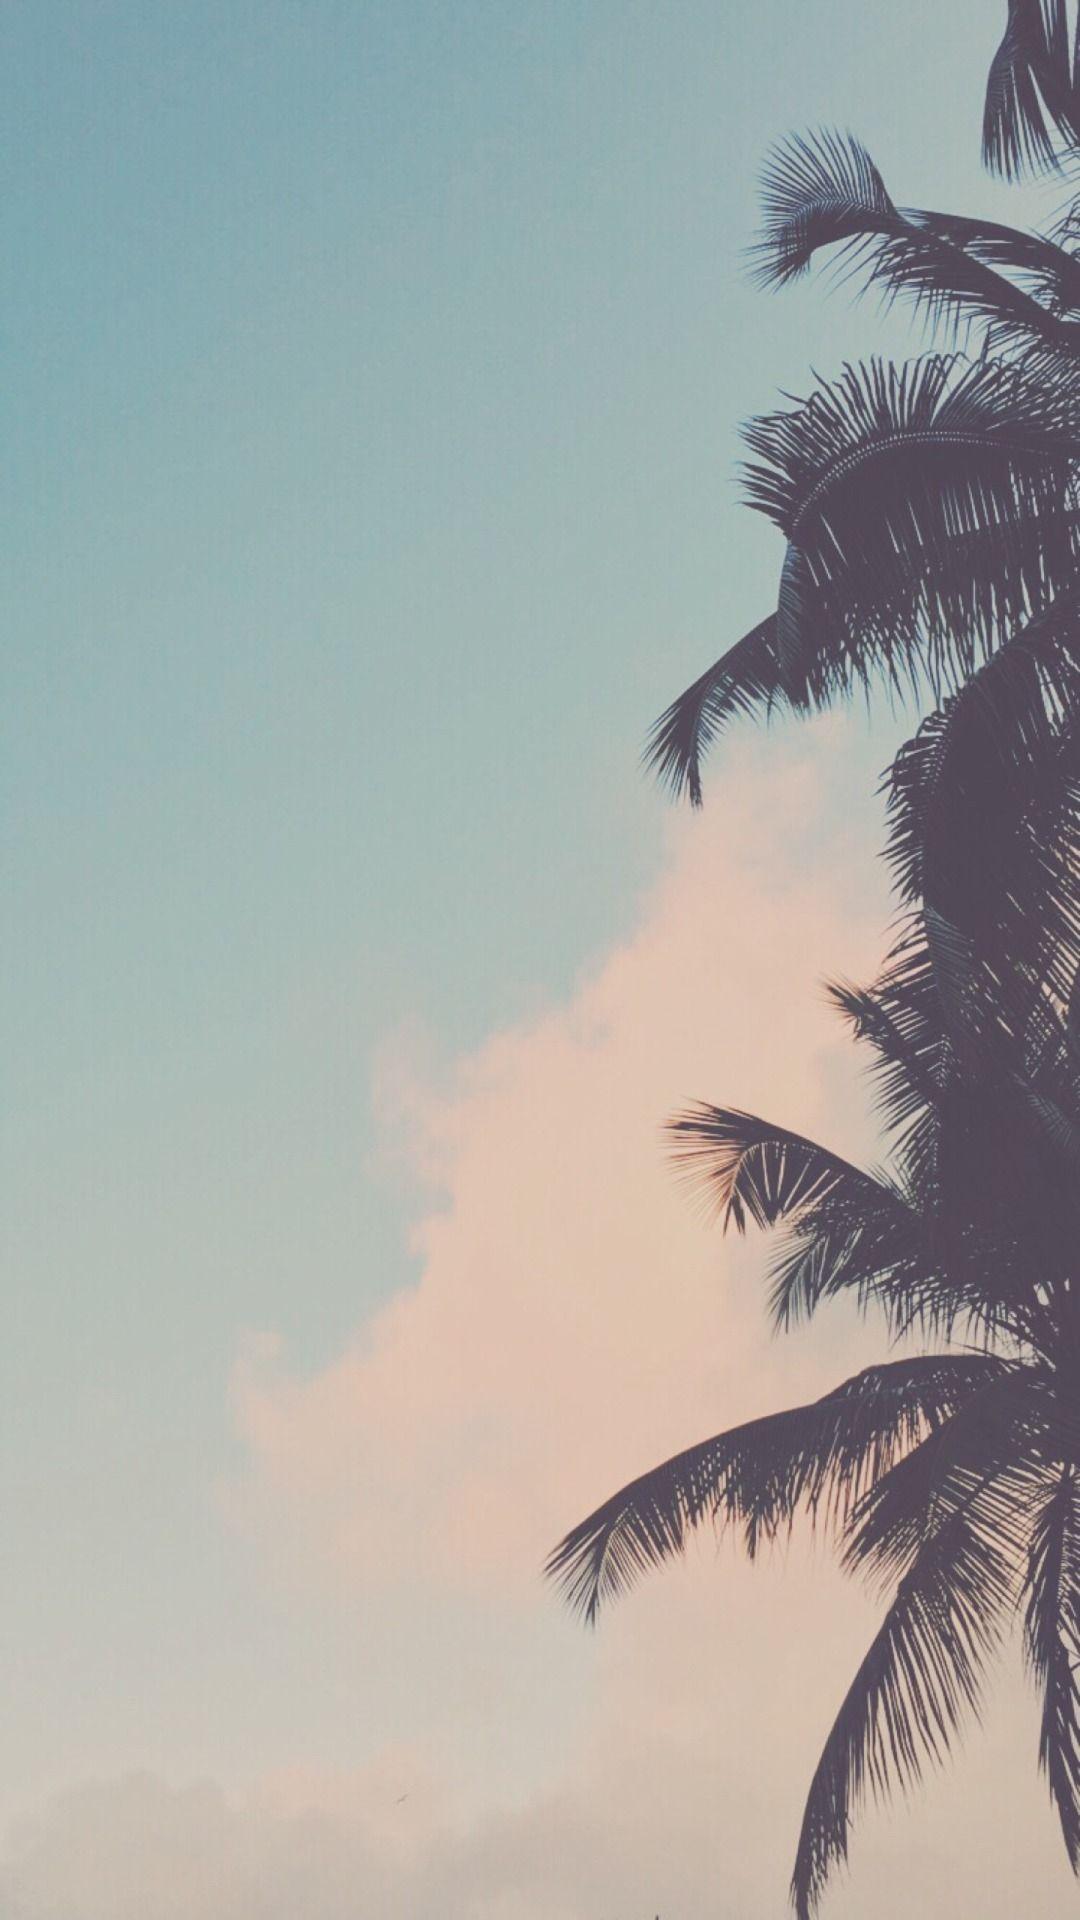 Chill wallpapers tumblr Gallery